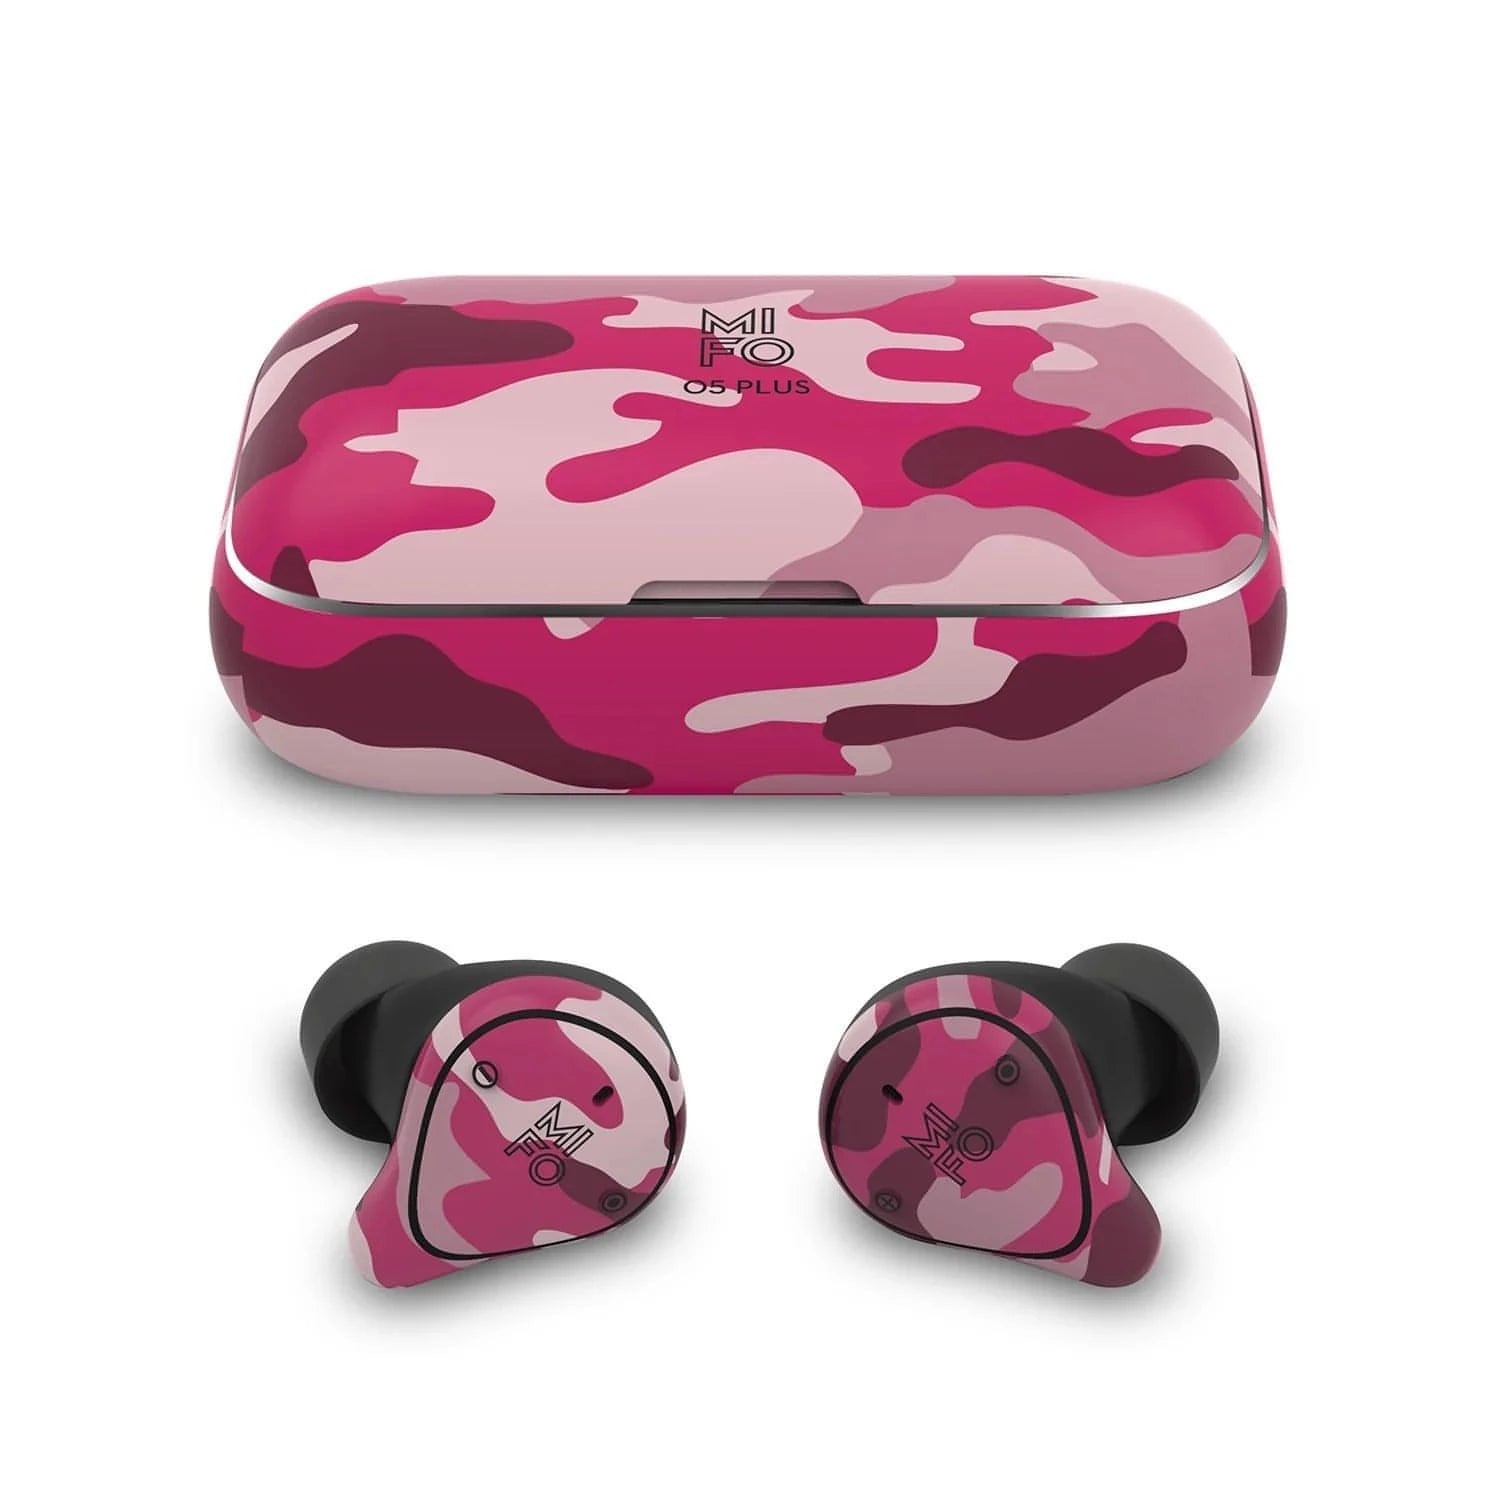 Camo Pink Mifo Earbuds - Best TWS Earbuds with IPX7